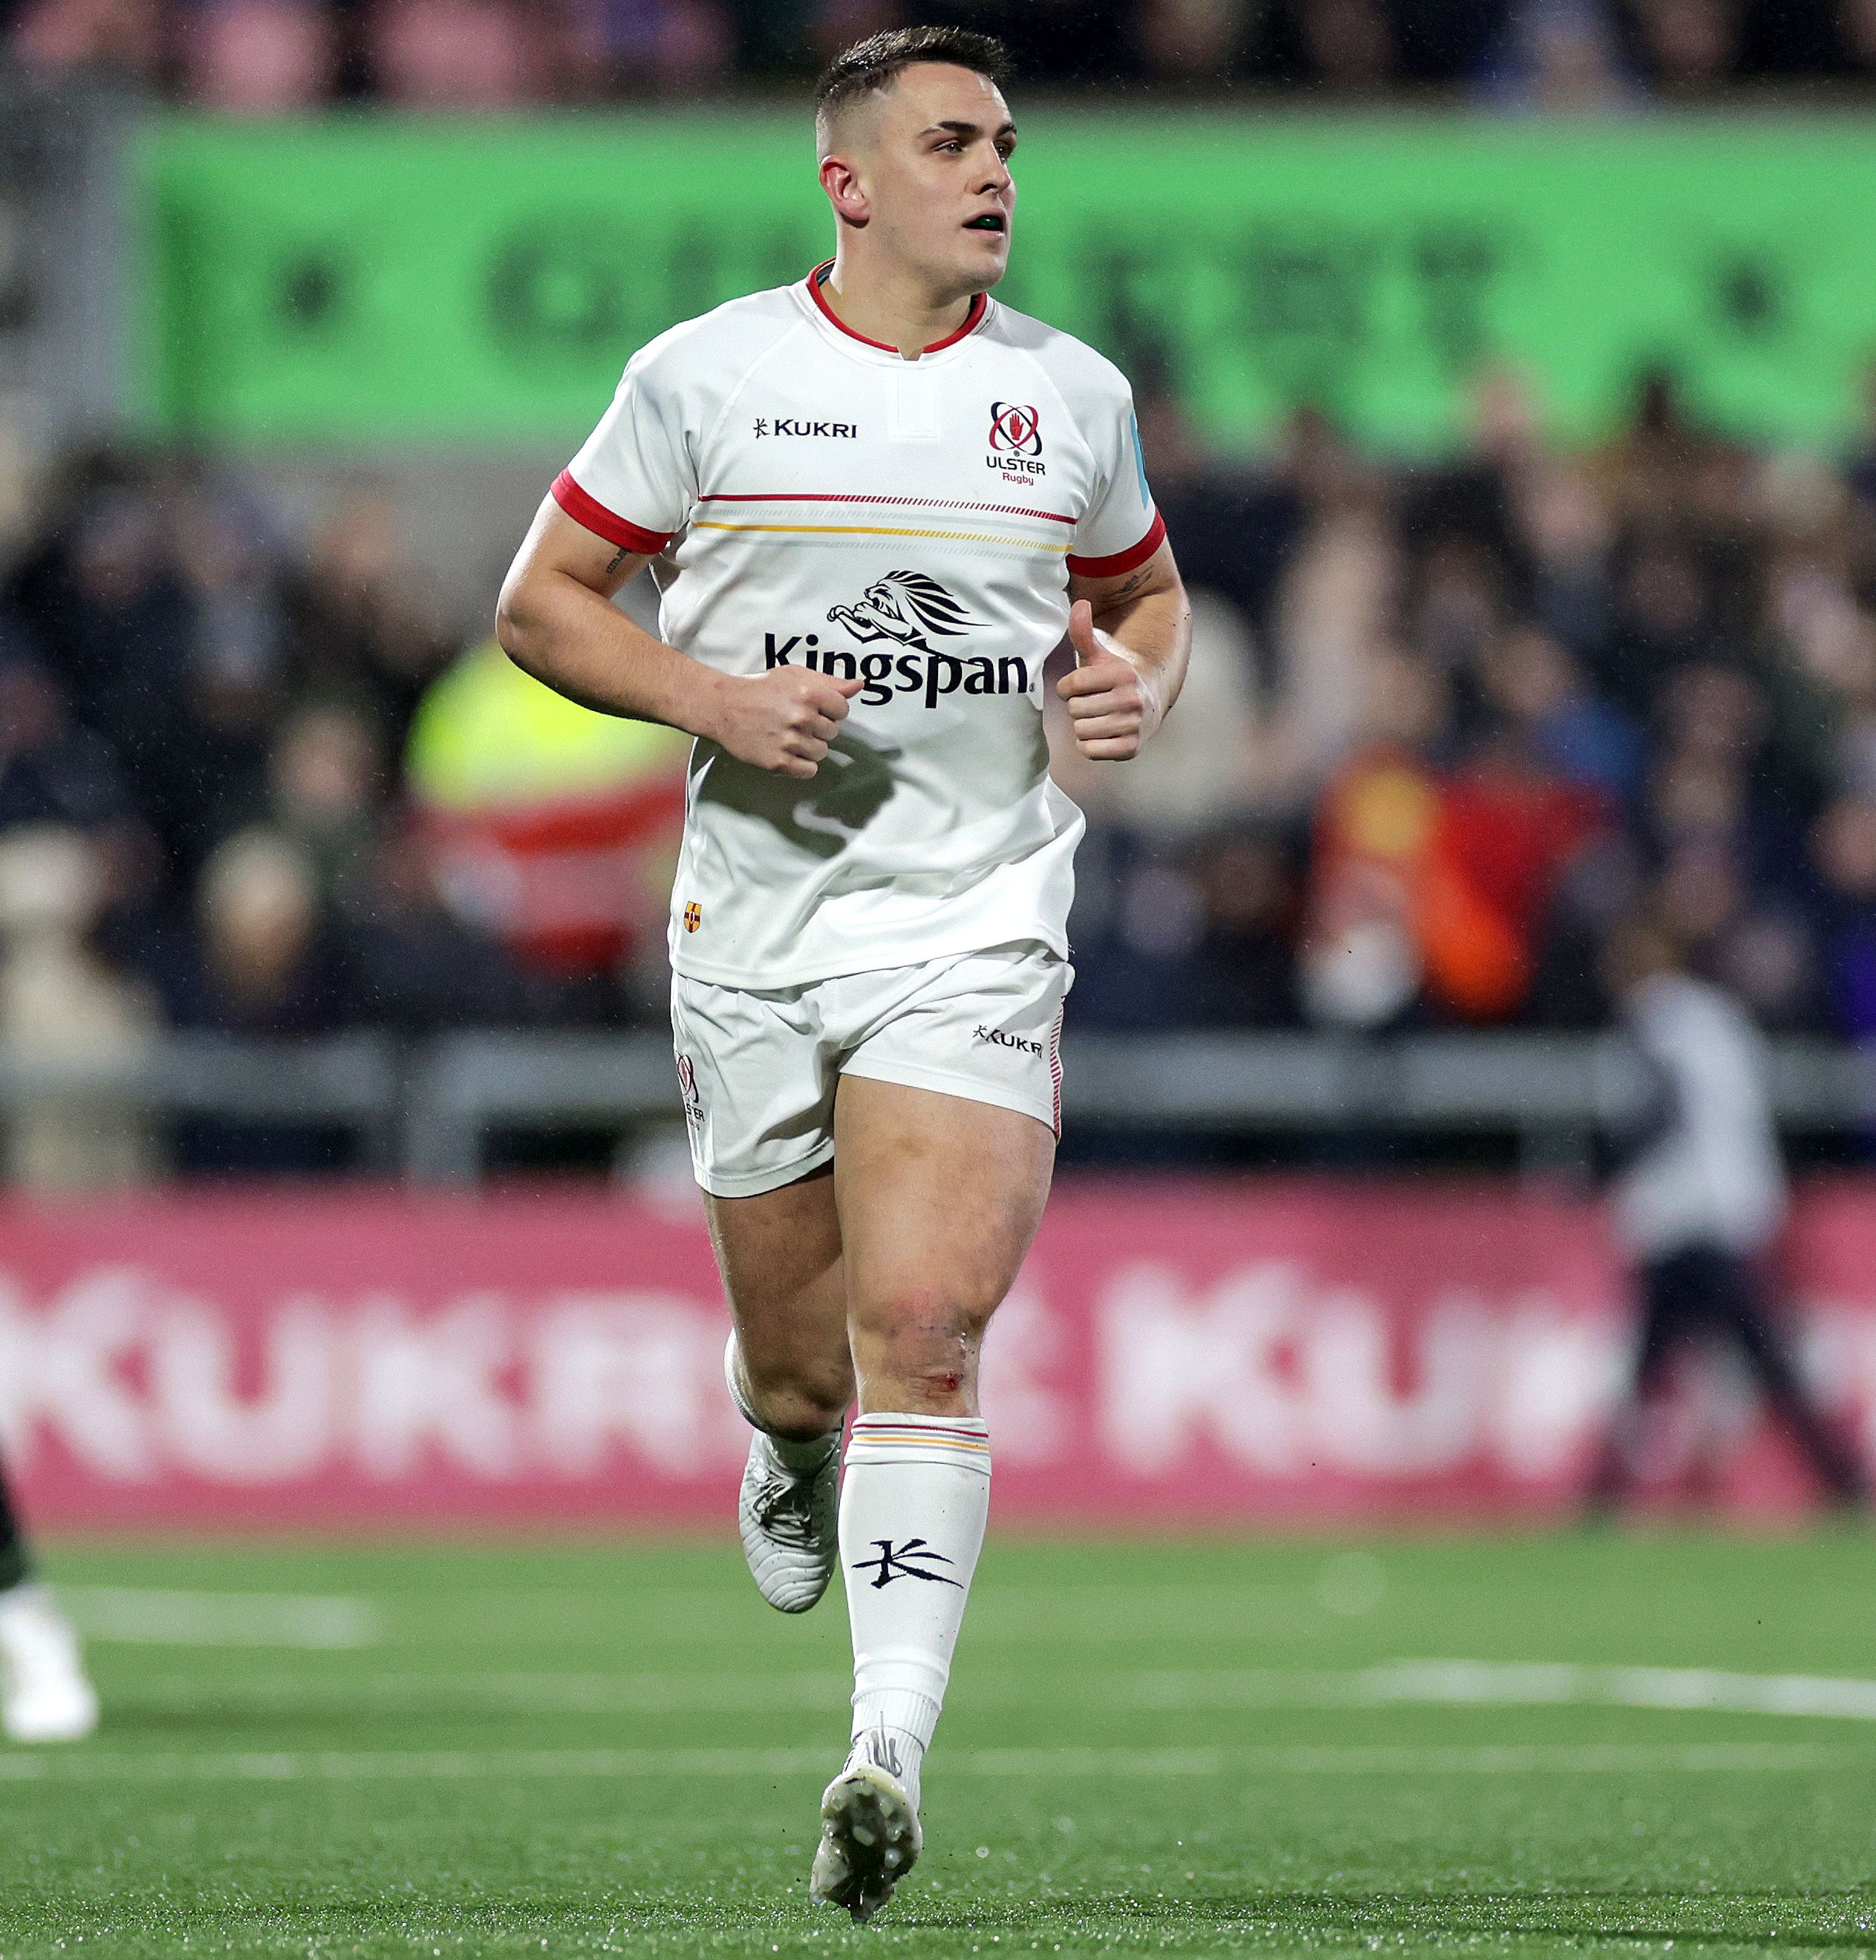 James Hume suffered a significant knee injury against Cardiff last week and joins the growing list of absentees for Friday\'s game against Benetton 